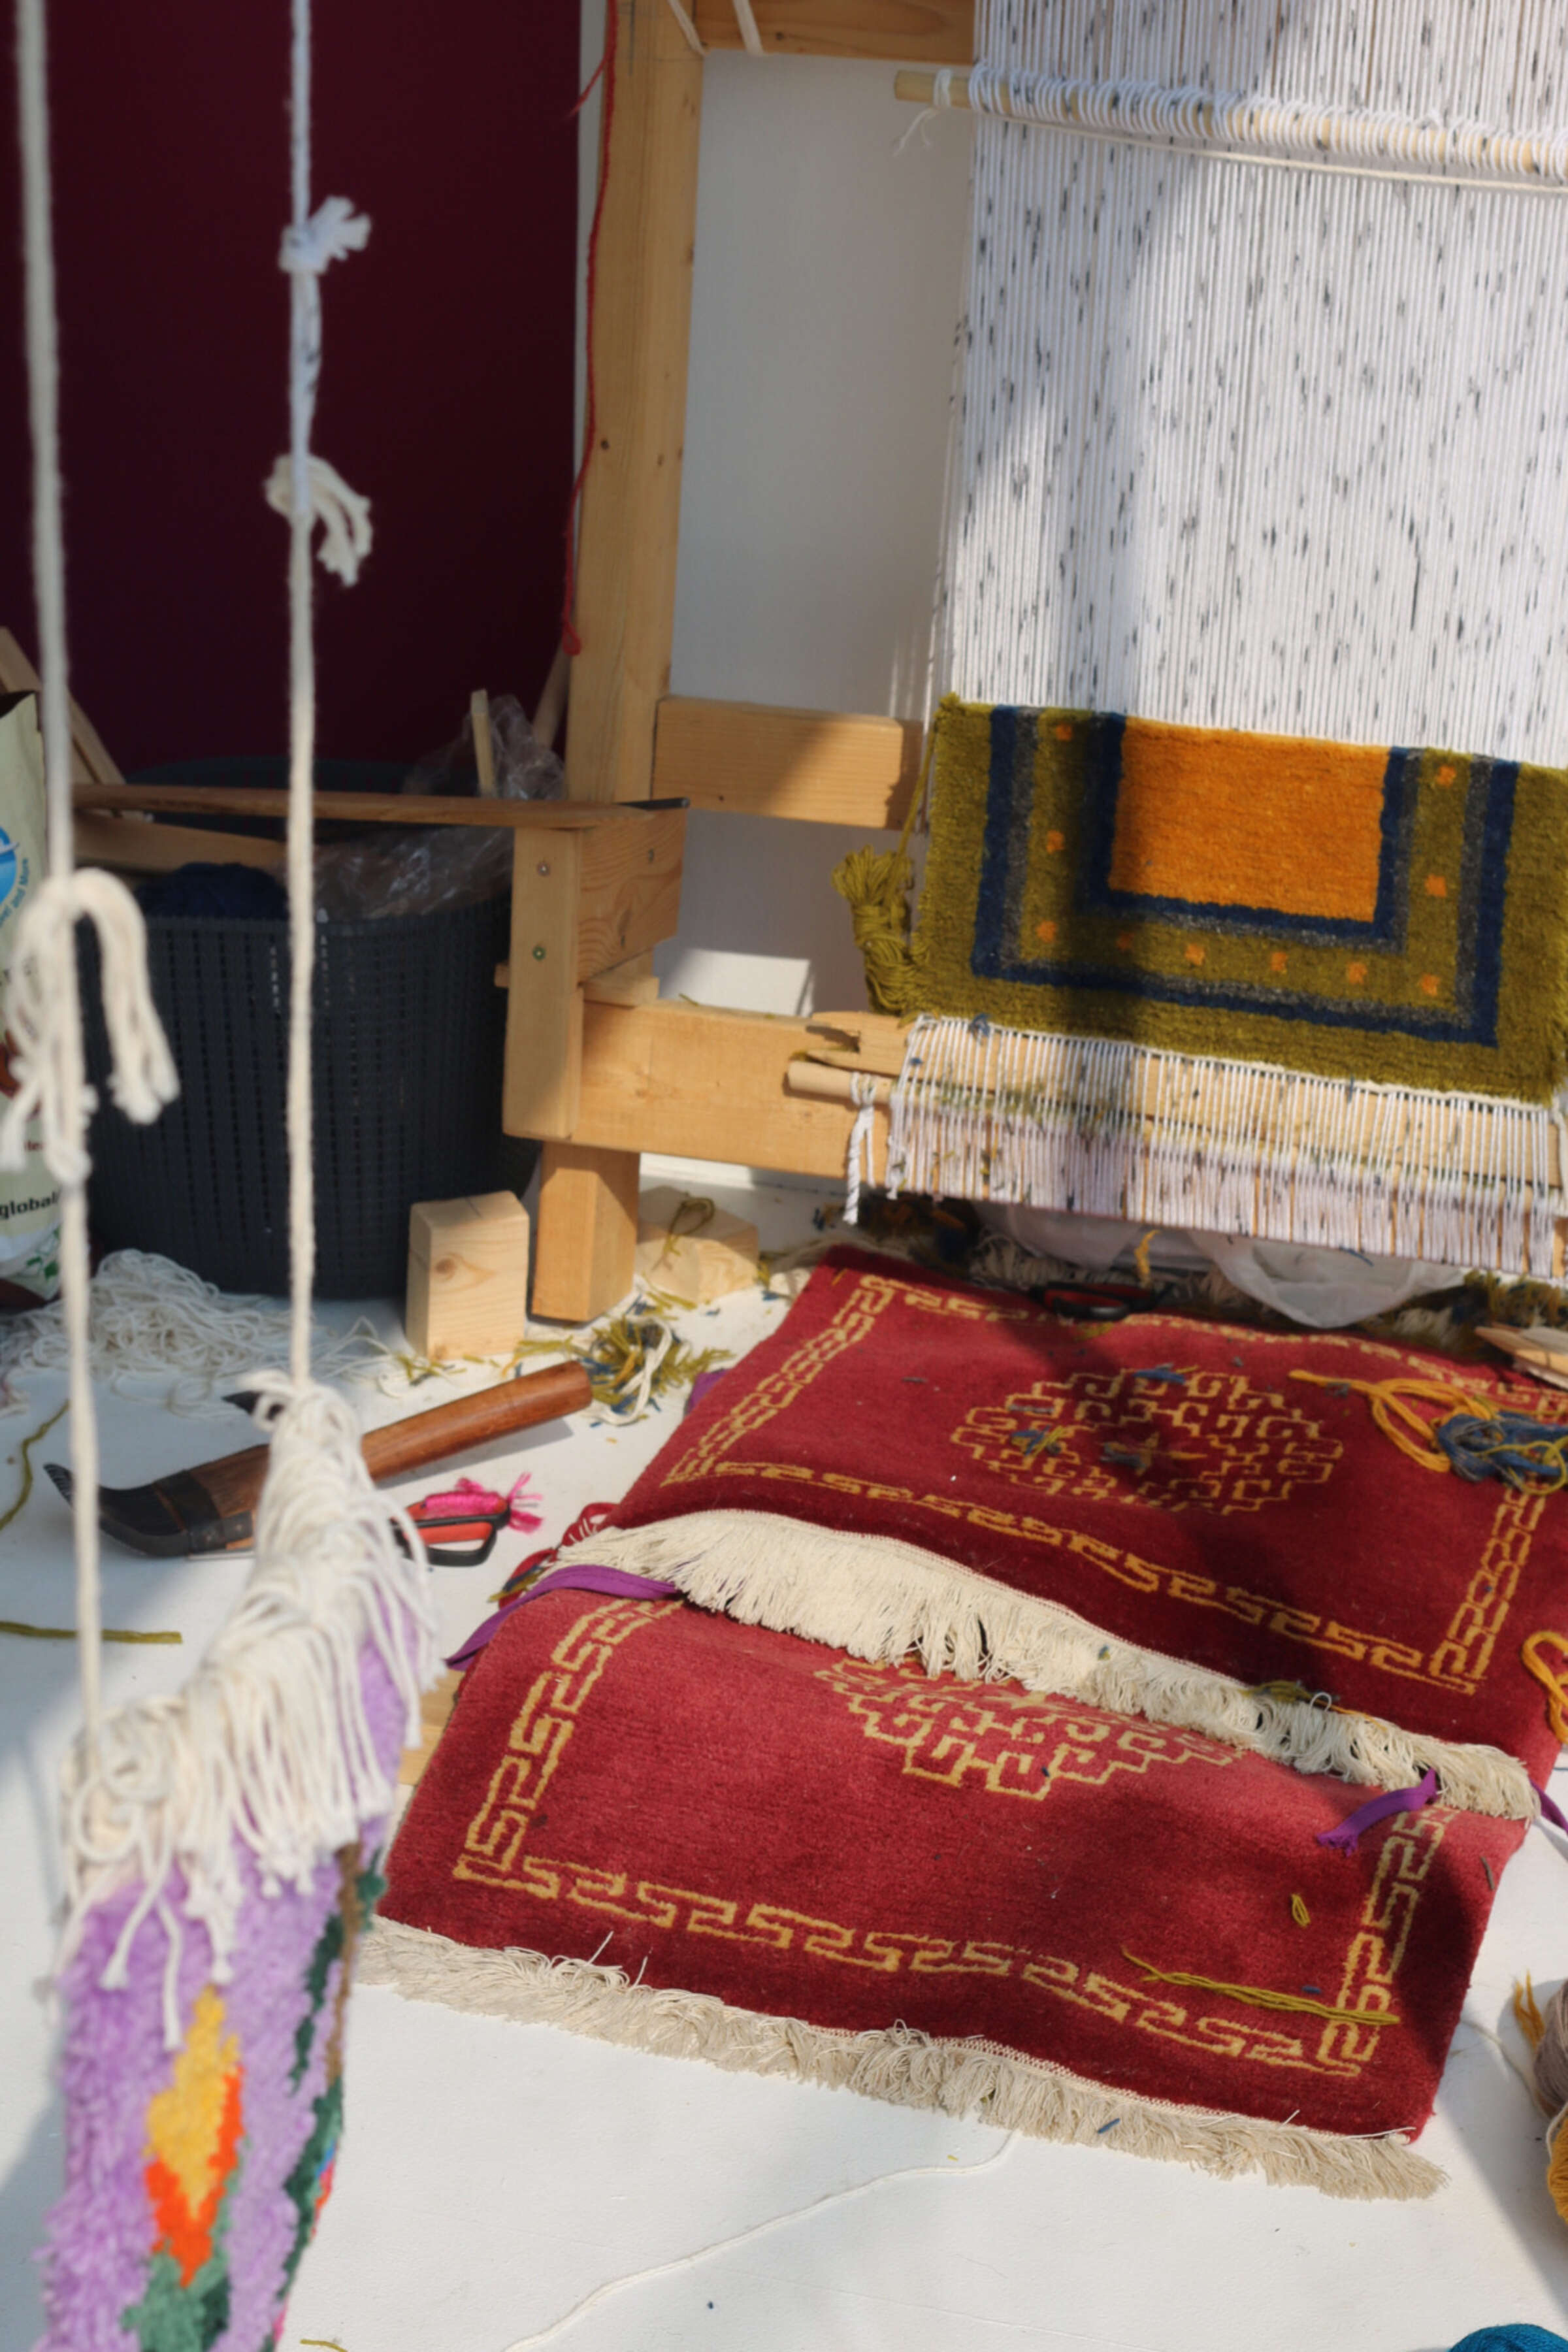 A weaving loom with partially completed textiles is surrounded by vibrant, handmade rugs and weaving materials. The textiles feature intricate patterns in various colors, including red, yellow, and purple. Some tools and yarns are scattered around the workspace.